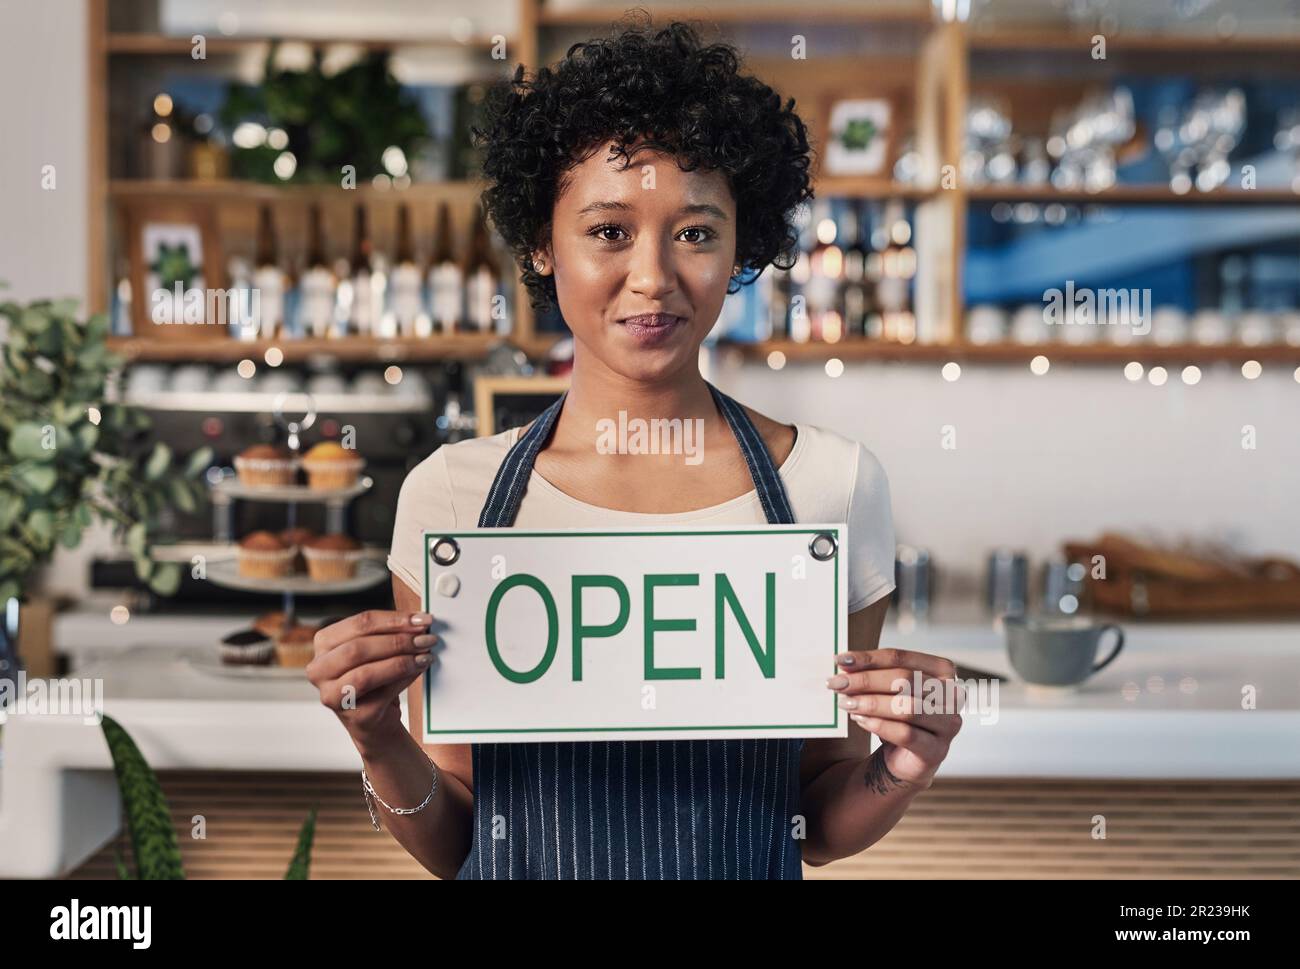 Woman, open sign and portrait in cafe of small business owner or waitress for morning or ready to serve. Female person or restaurant server holding Stock Photo